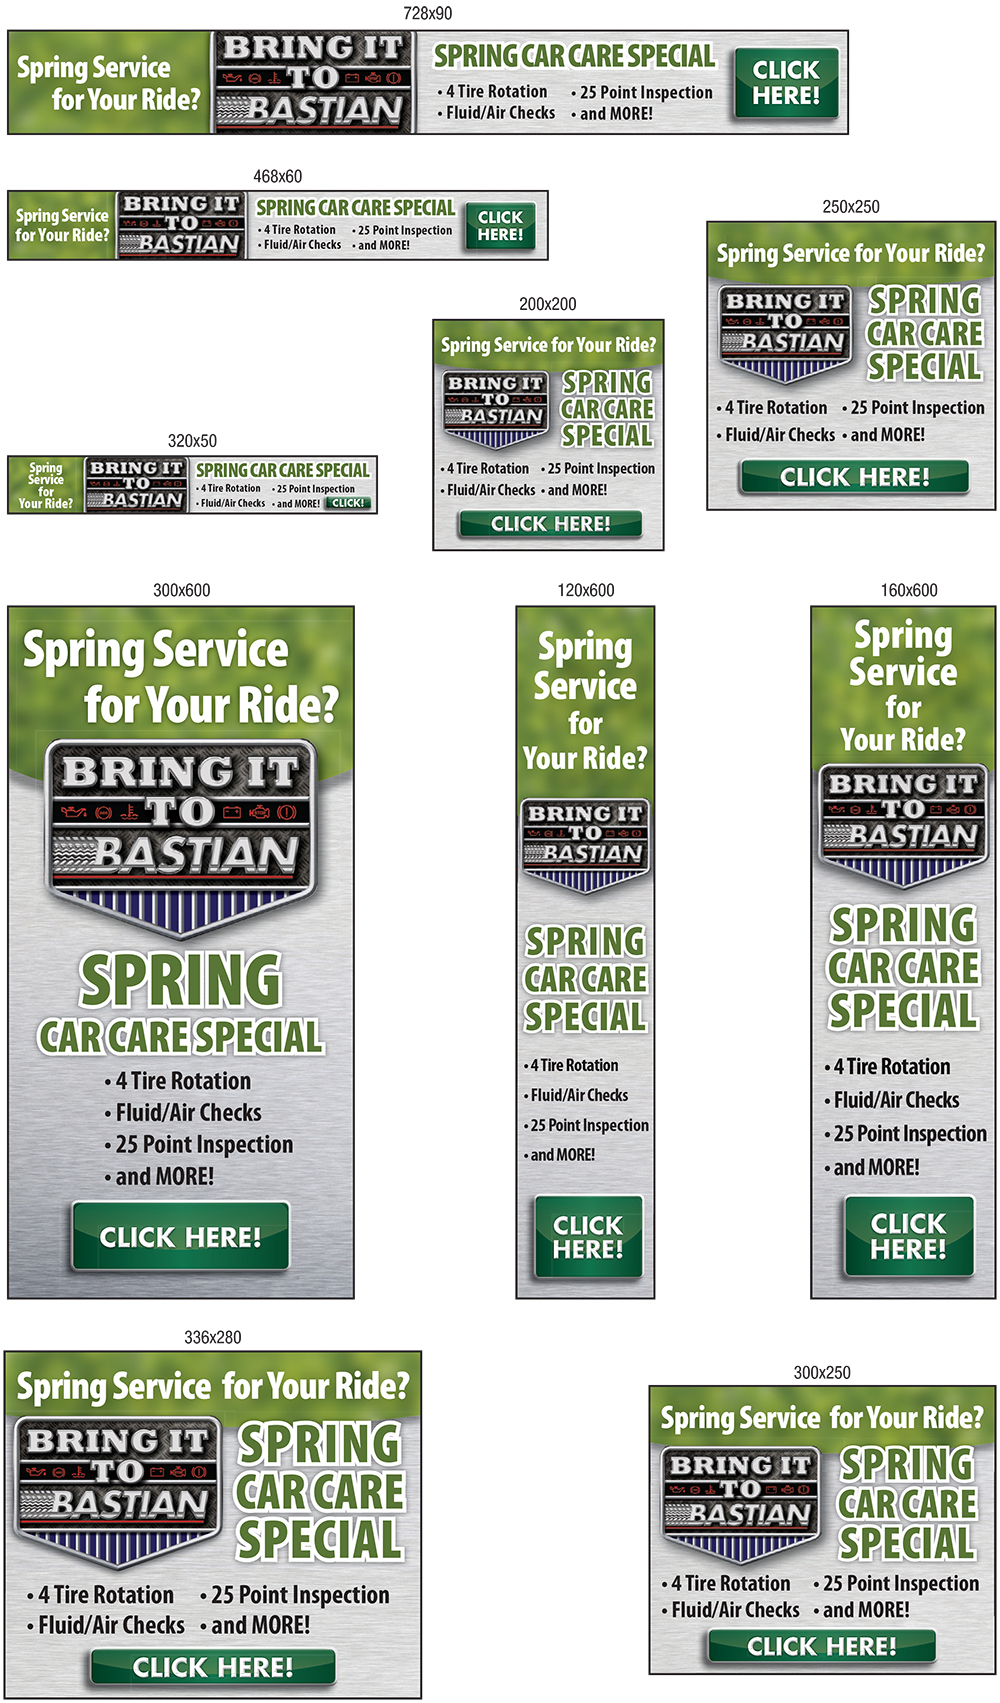 Google Adwords Display Ads for Bastian Tire and Auto Center